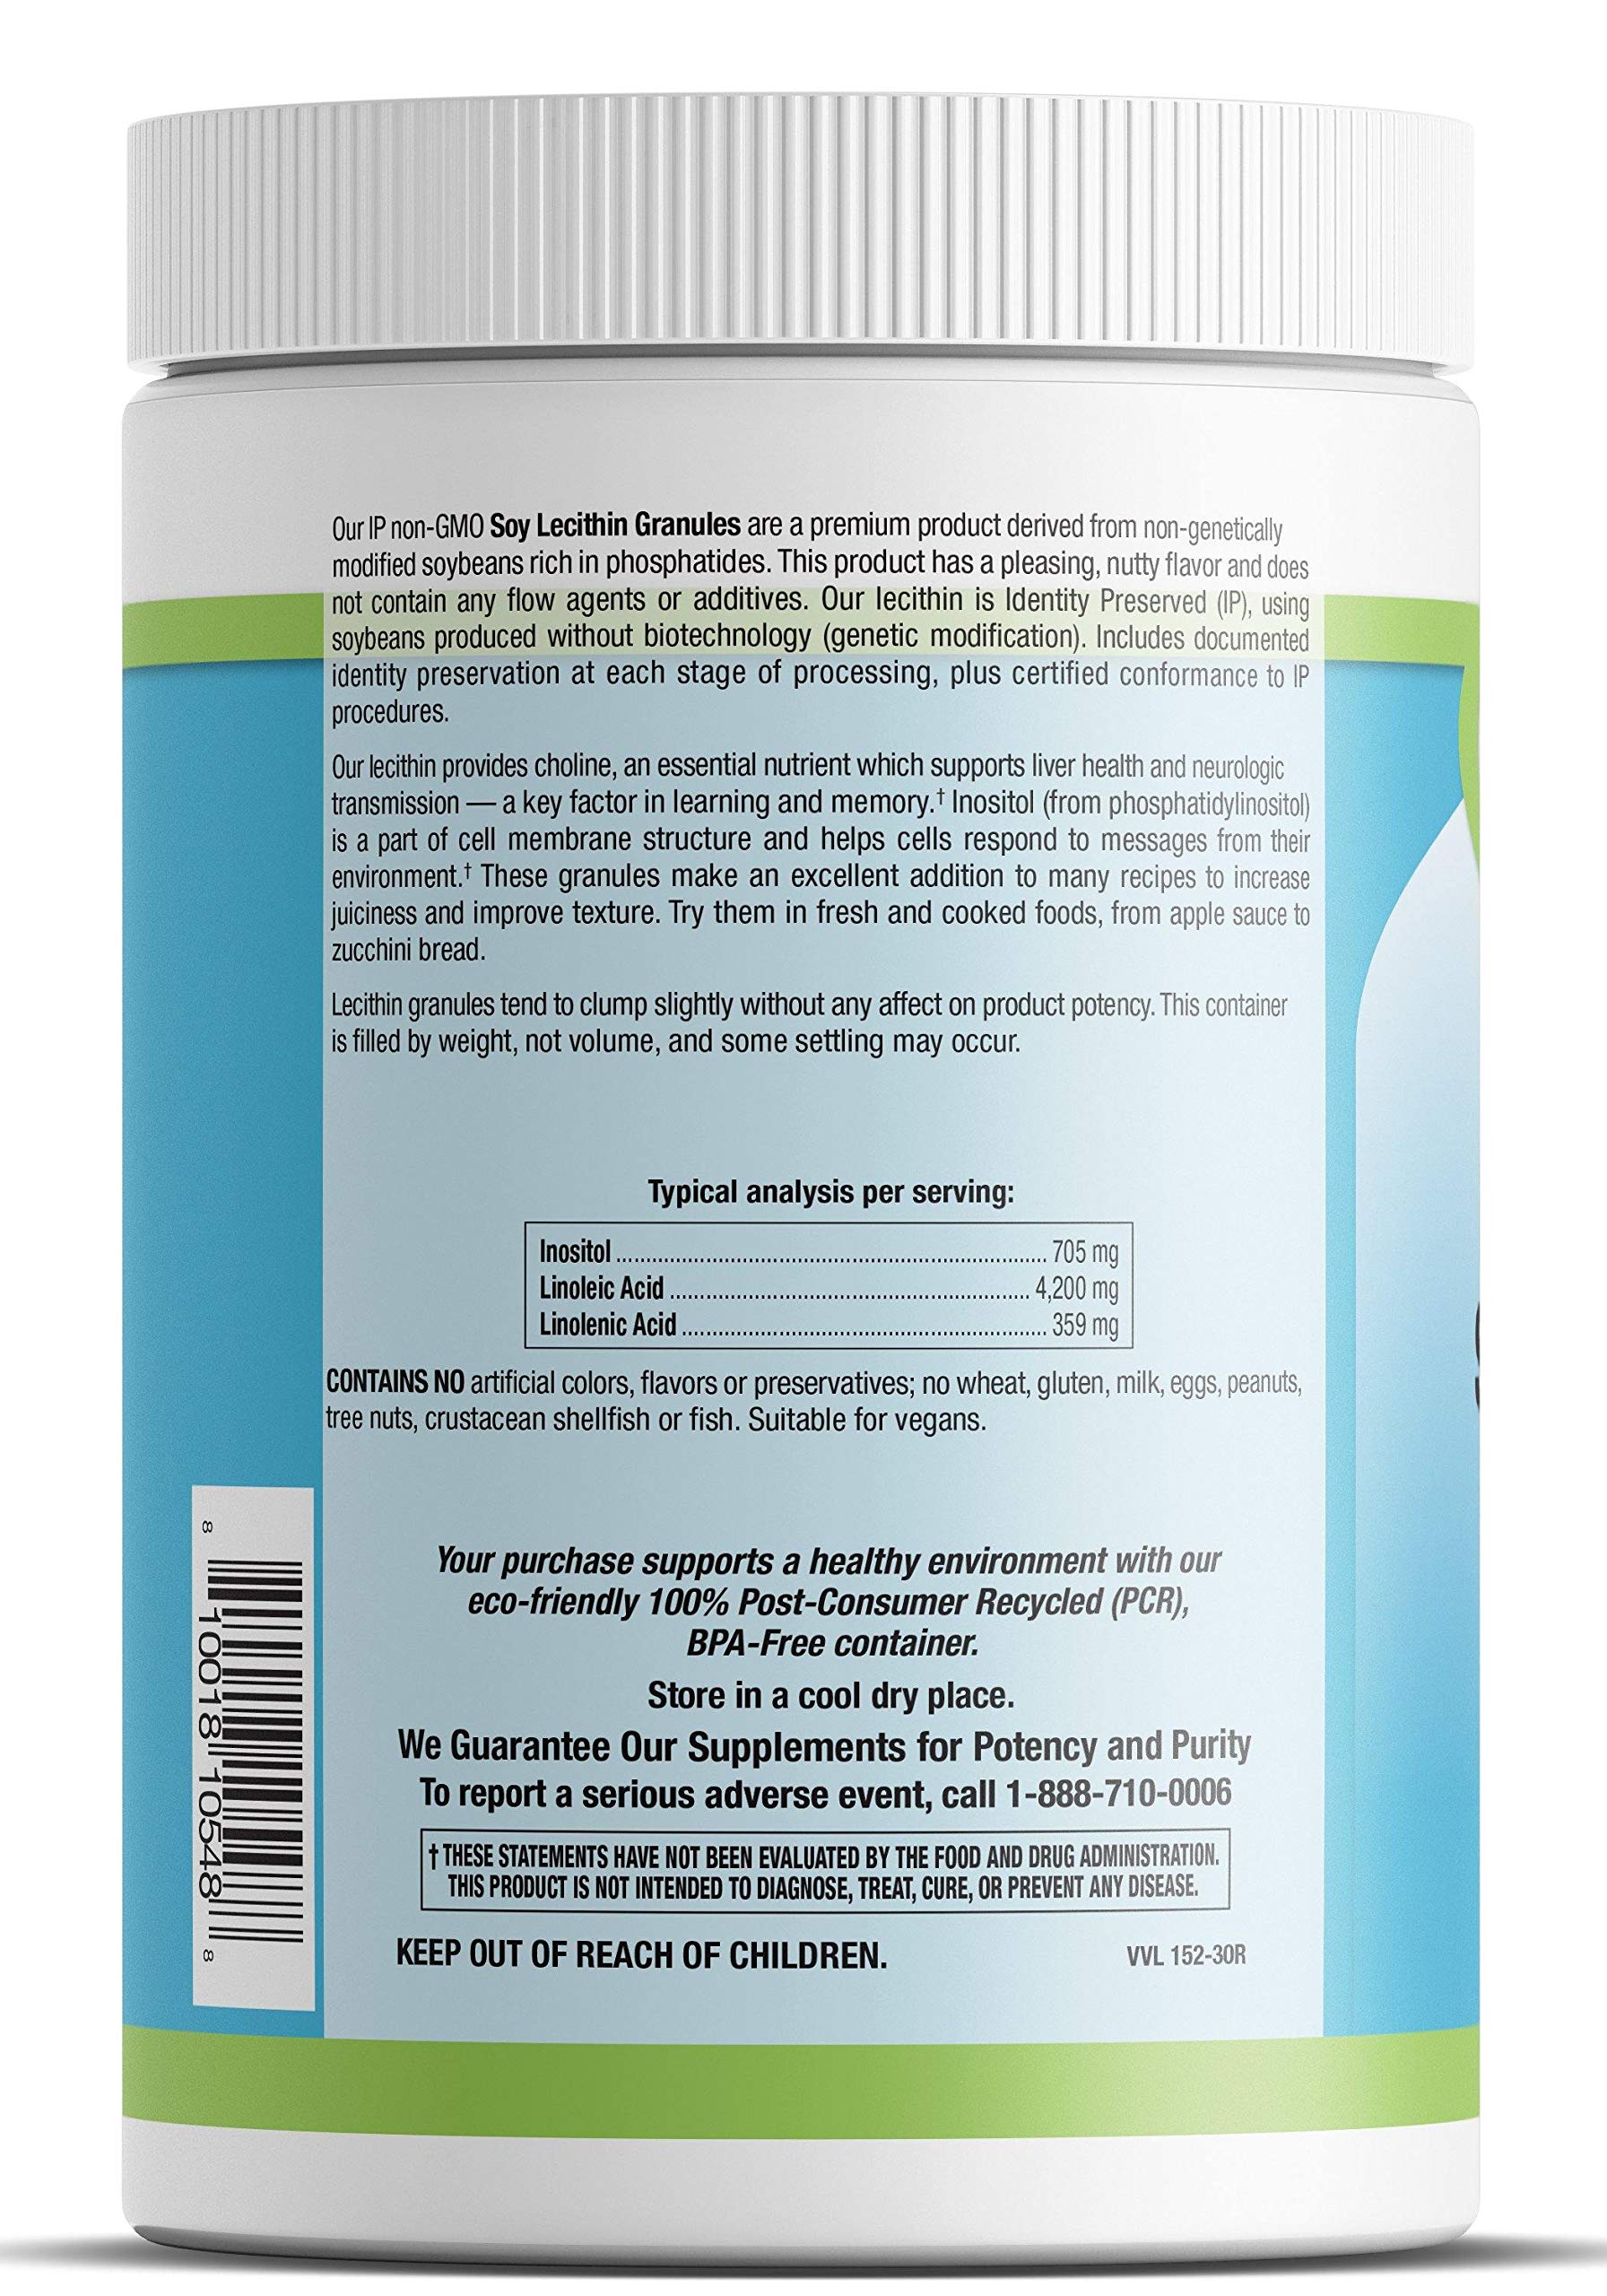 Livamed - IP Non-GMO Soy Lecithin Granules (New PCR Tub Coming Soon) 16 oz Count